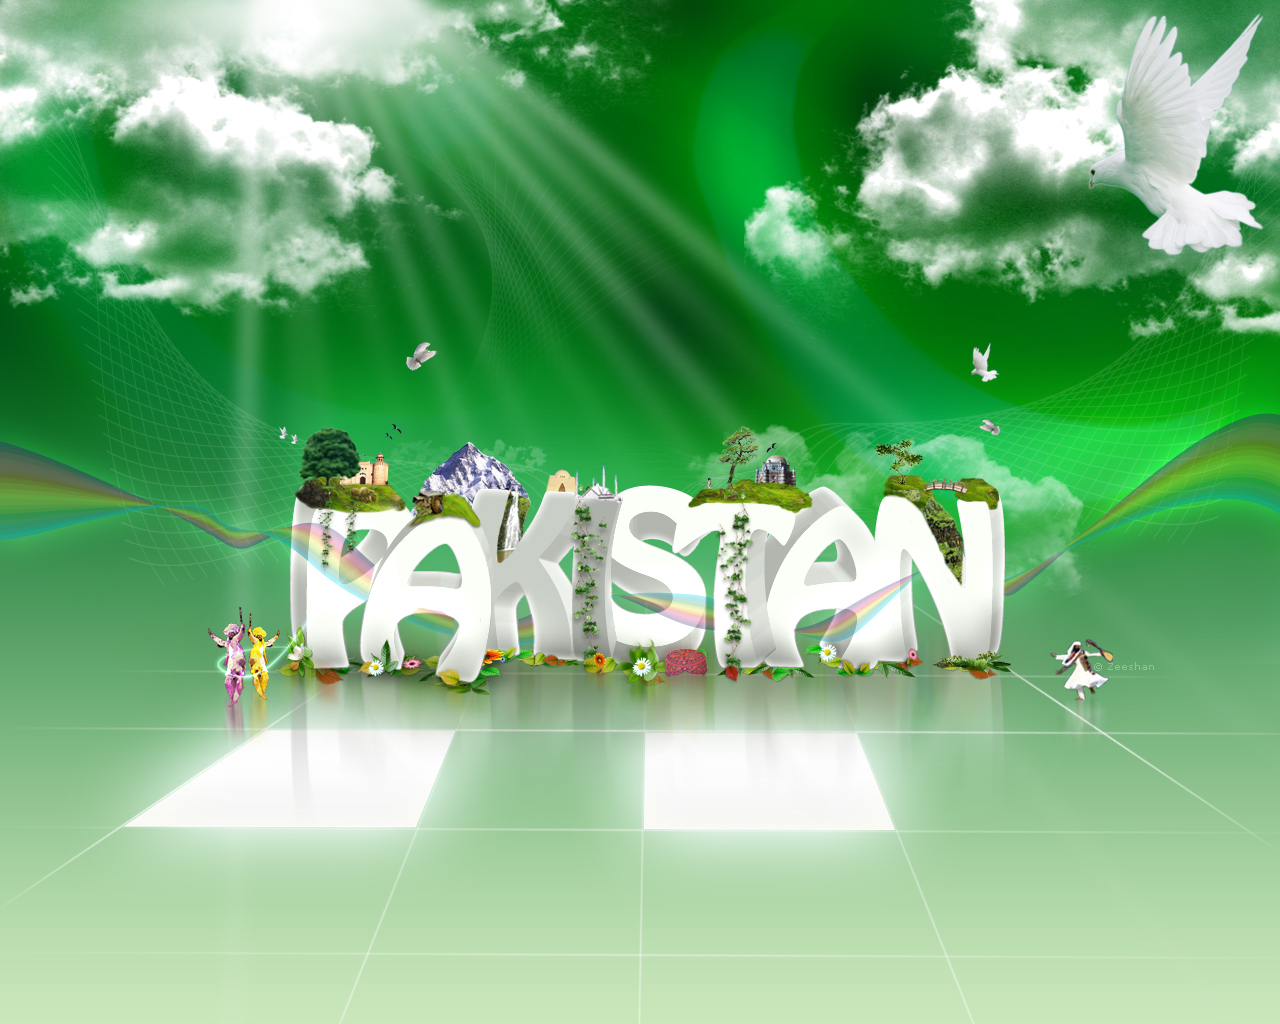 links hd computer and mobile wallpapers pakistani flags hd computer 1280x1024